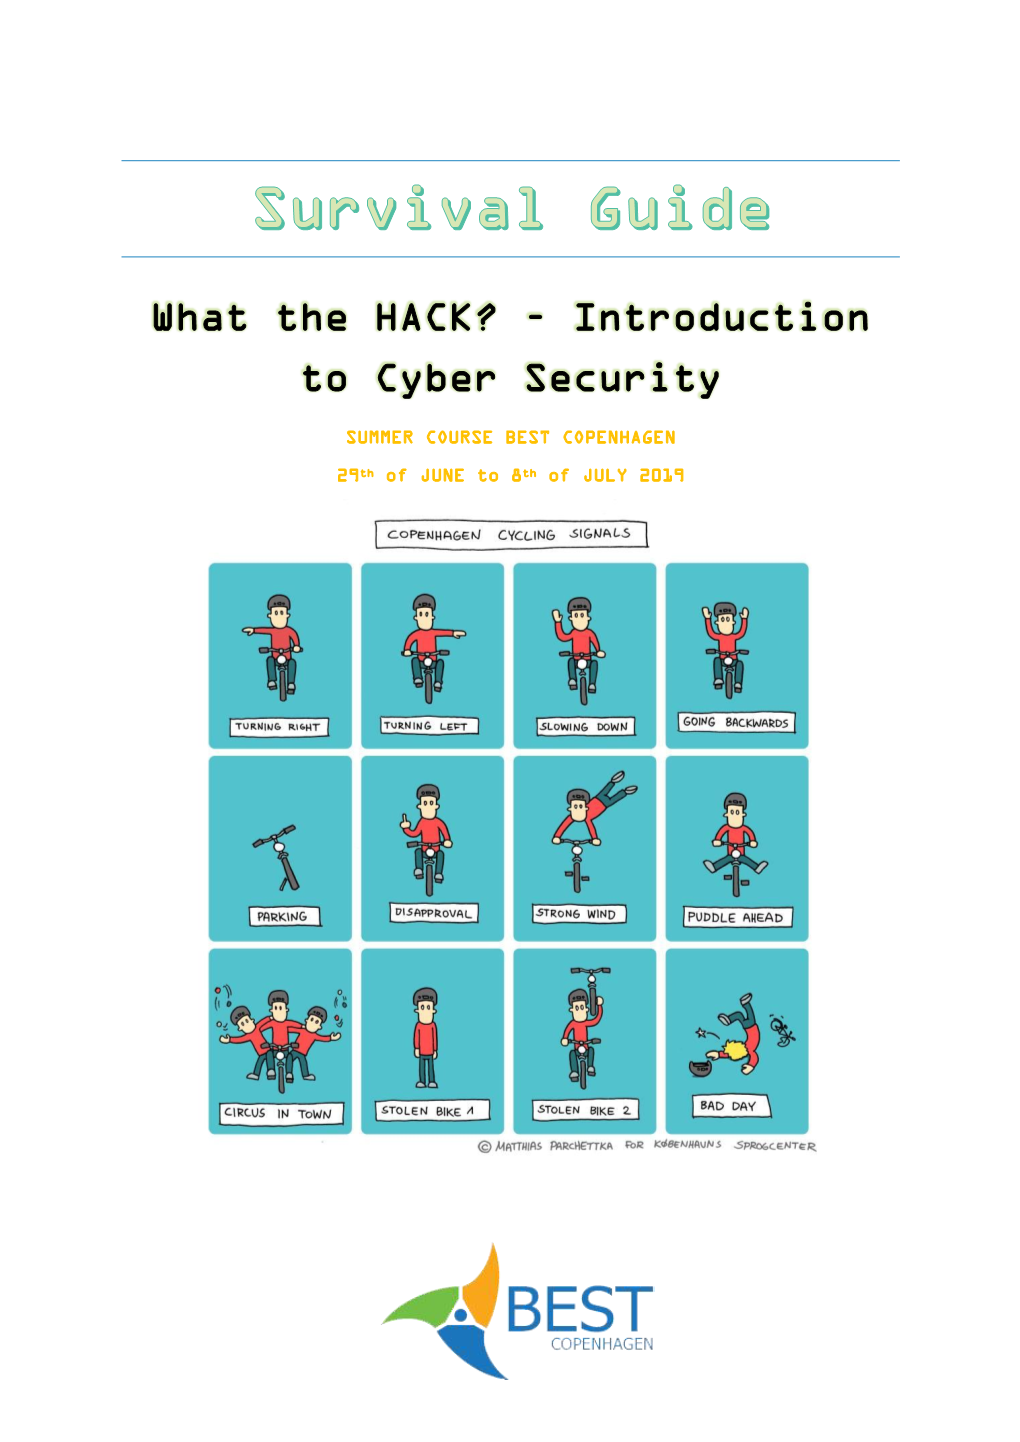 What the HACK? – Introduction to Cyber Security